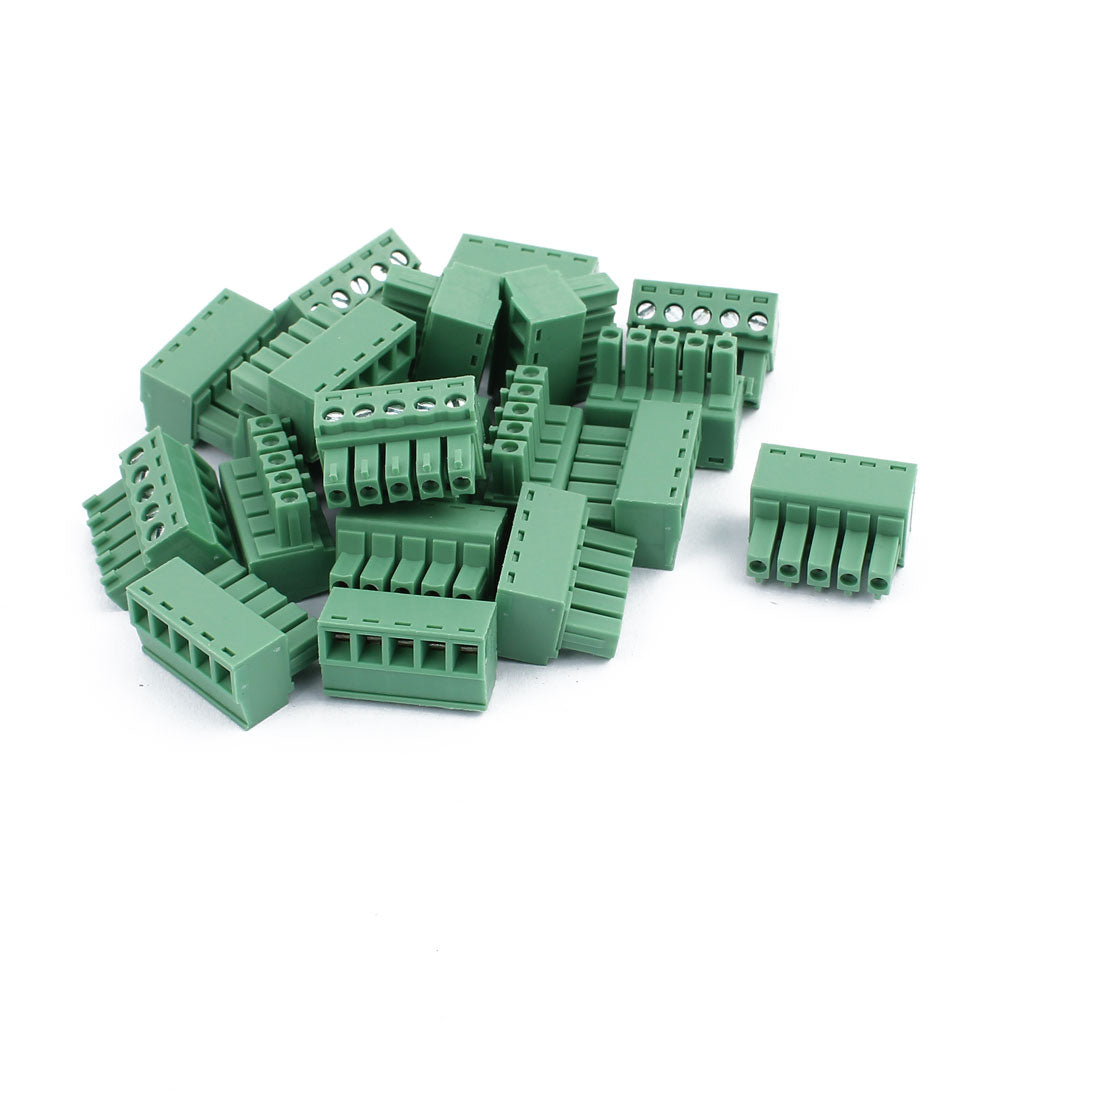 uxcell Uxcell 20Pcs 300V 2EDGK 3.81mm Pitch 5-Pin PCB Screw Terminal Block Connector